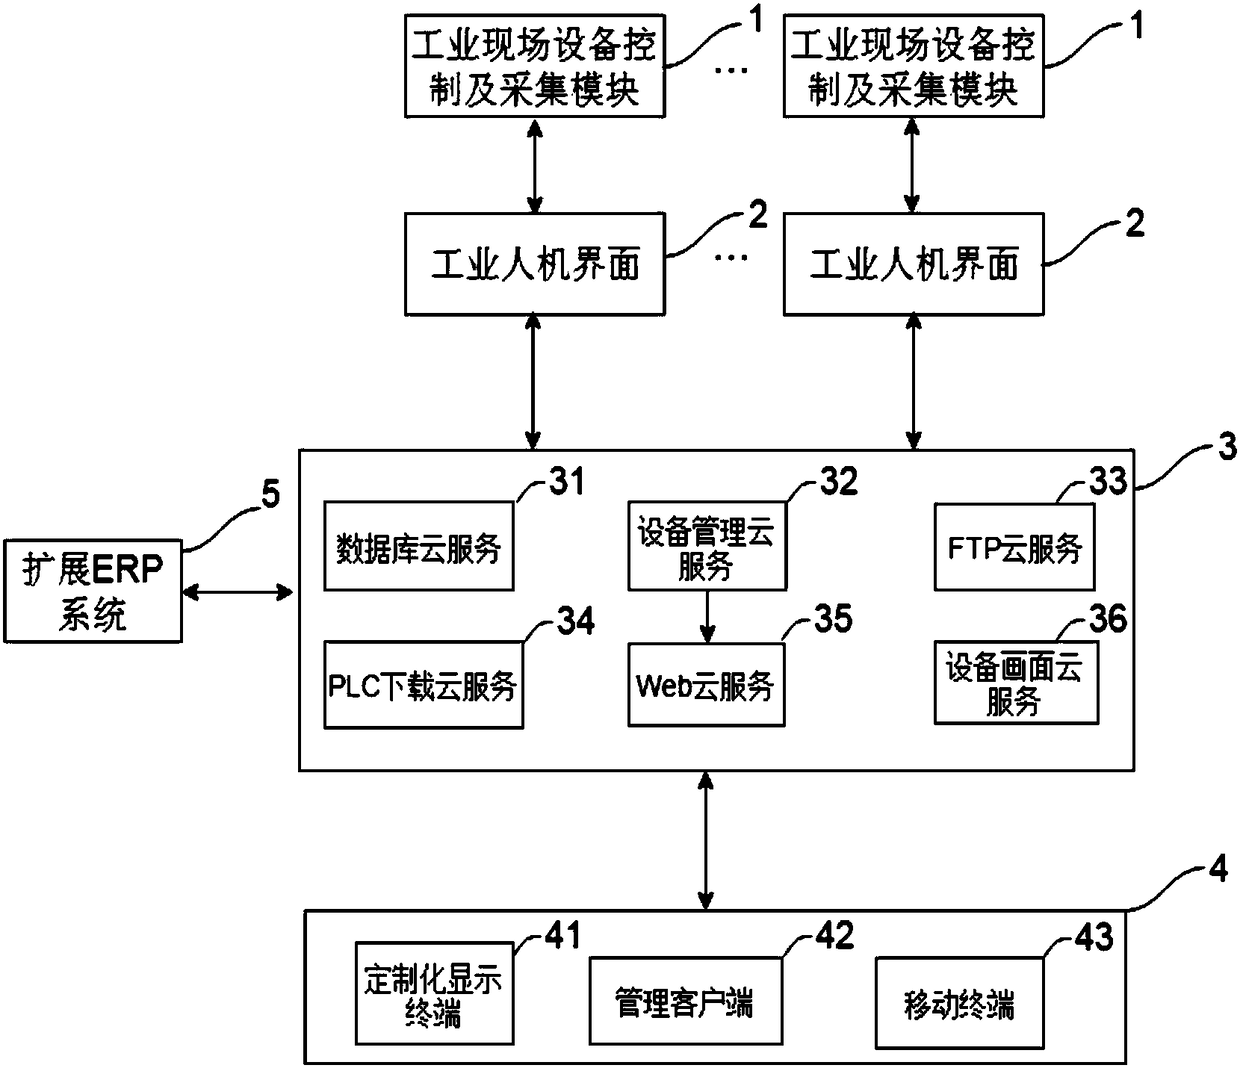 Remote industrial site management system and method based on industrial main-machine interface